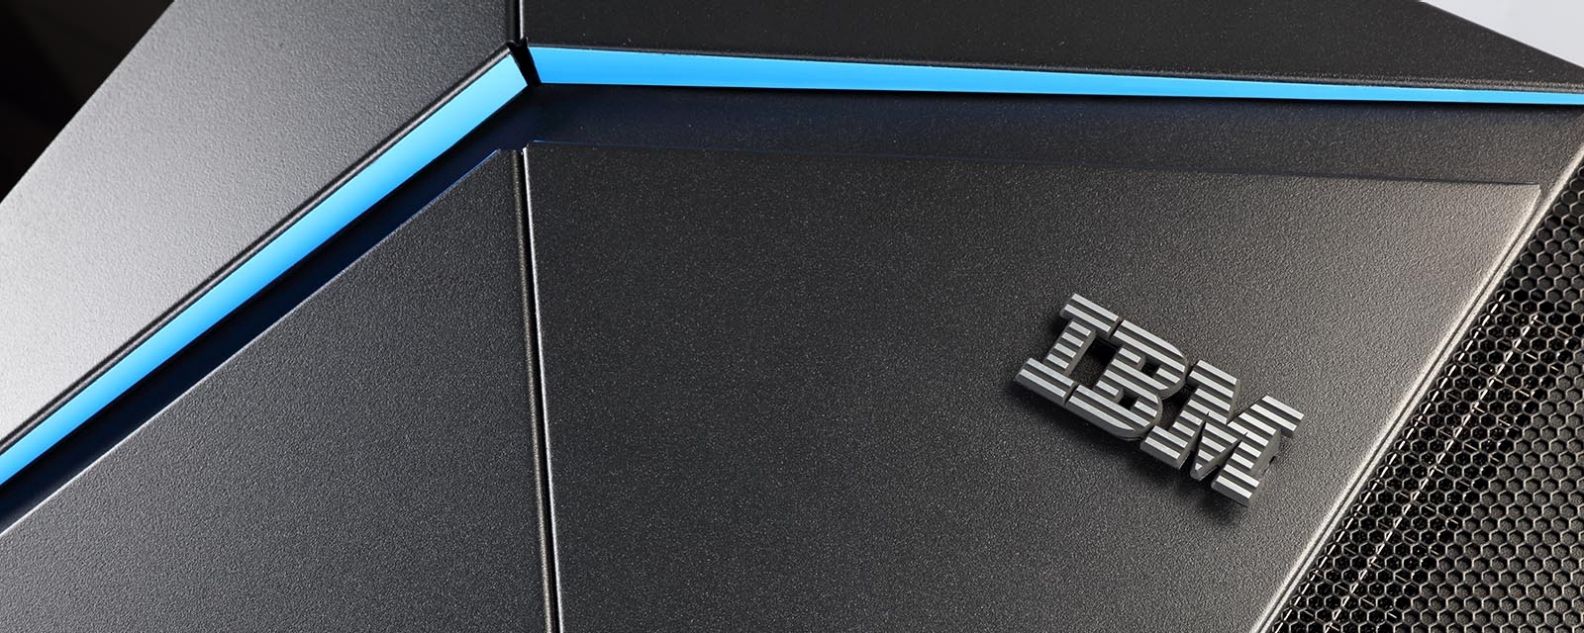 Close-up of the upper right side of the IBM System z mainframe, showing a blue horizontal stripe above the IBM logo.